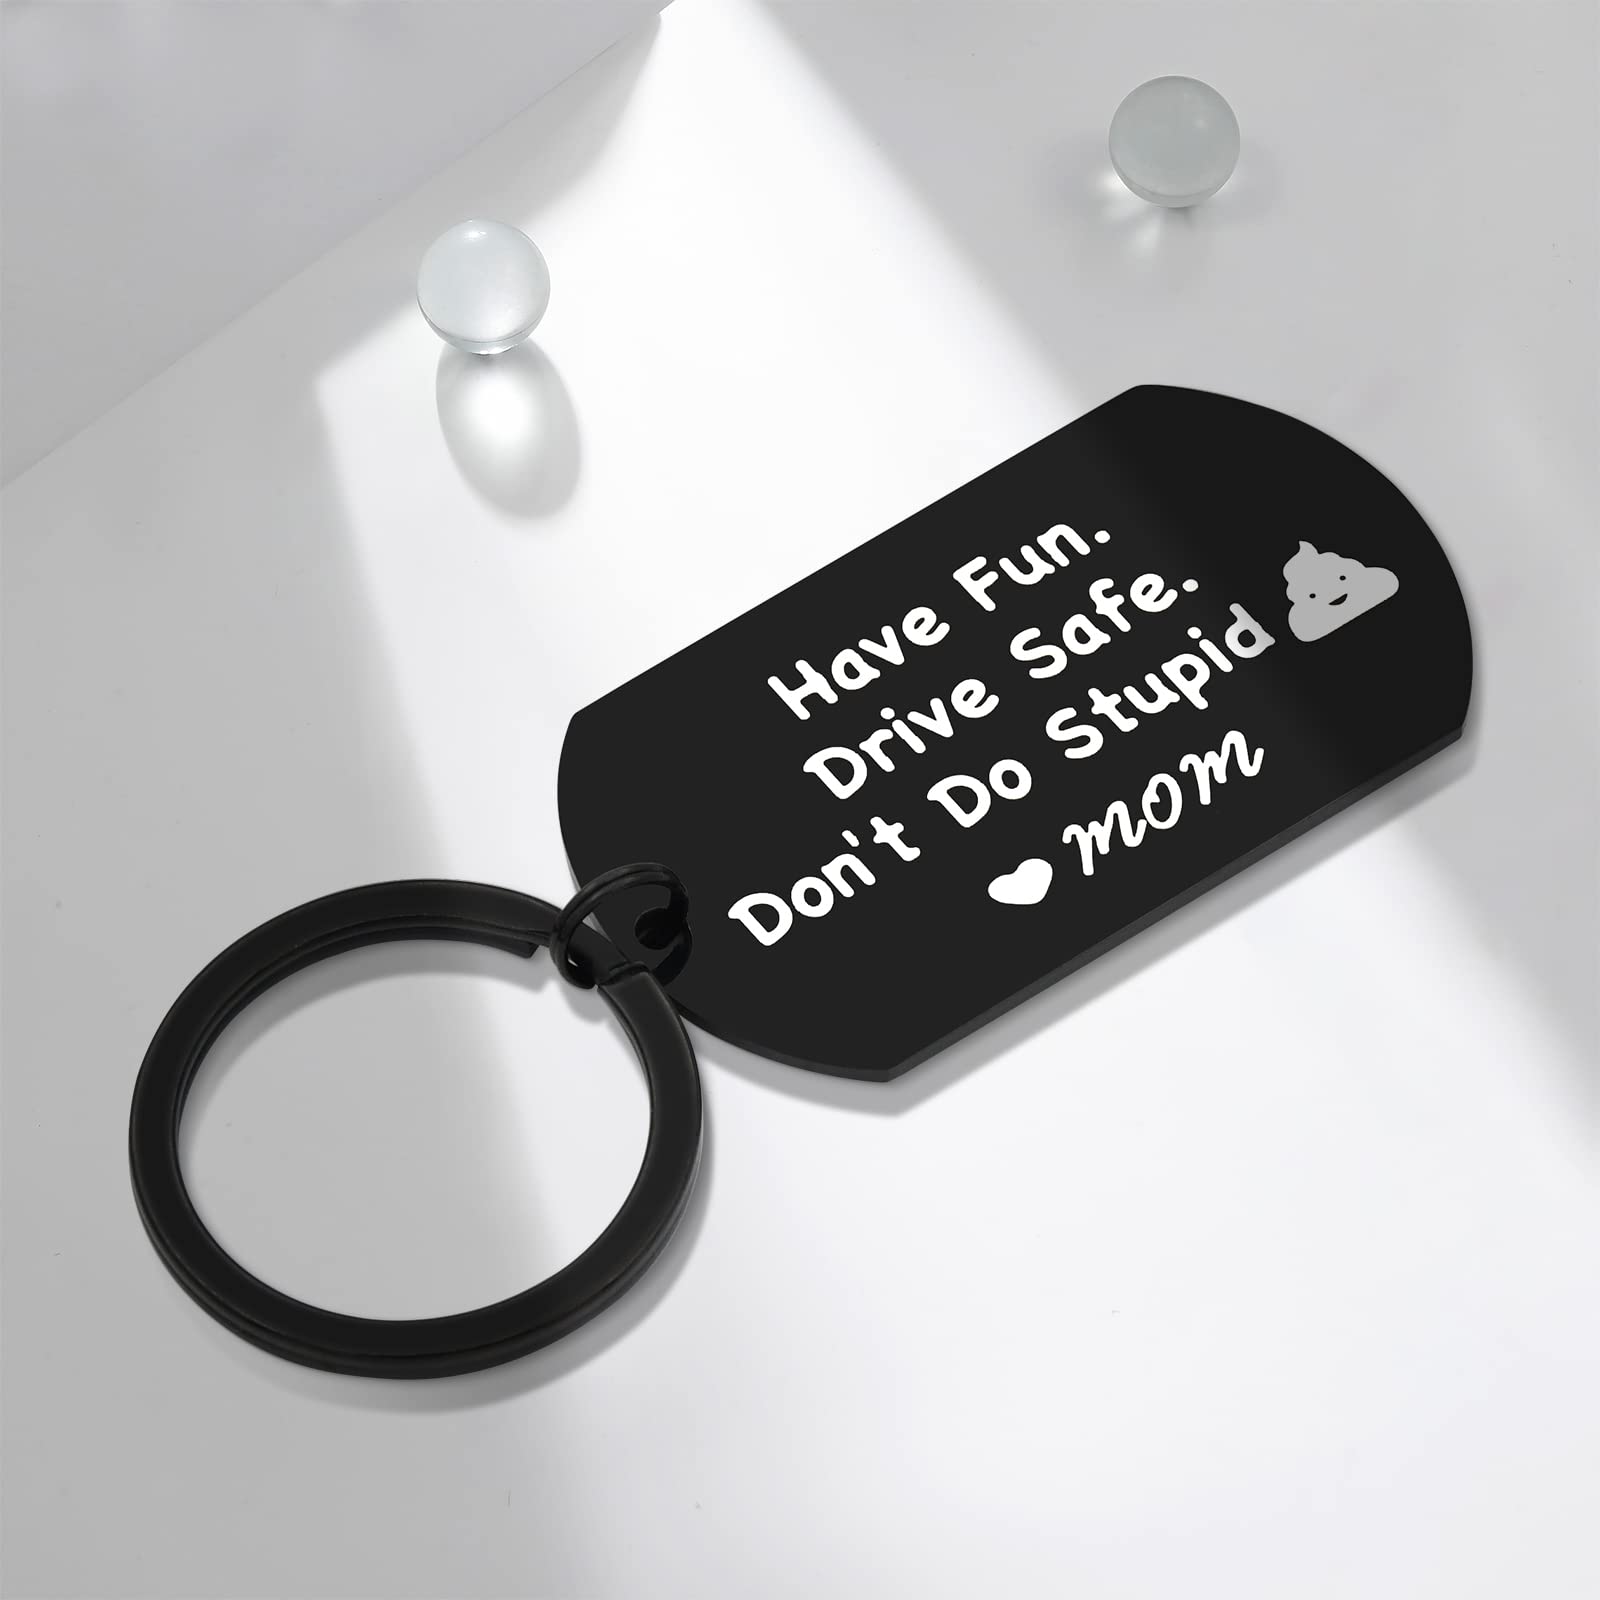 Be Safe. Have Fun & Don't Do Stupid Shit. Love Mom Dad, Teenager Key Chain,  New Driver Gift, Sweet Sixteen Birthday, BE SAFE Keychain 